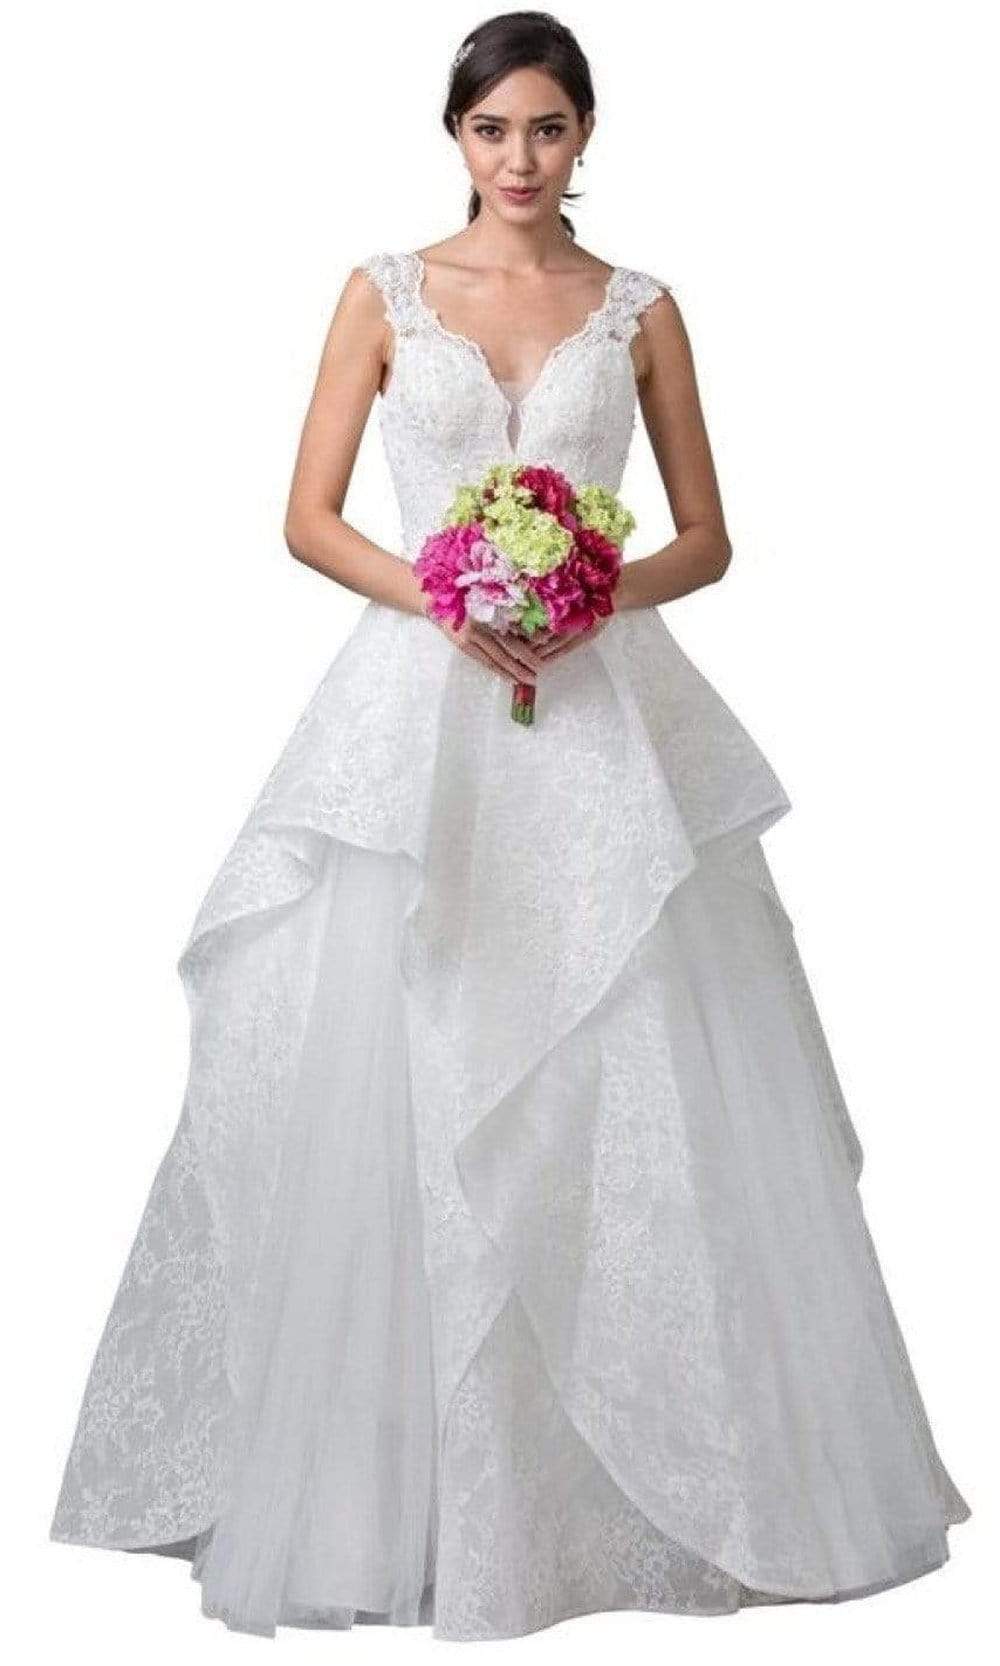 Image of Aspeed Bridal - W2375 Lace Floral Layered Wedding Dress